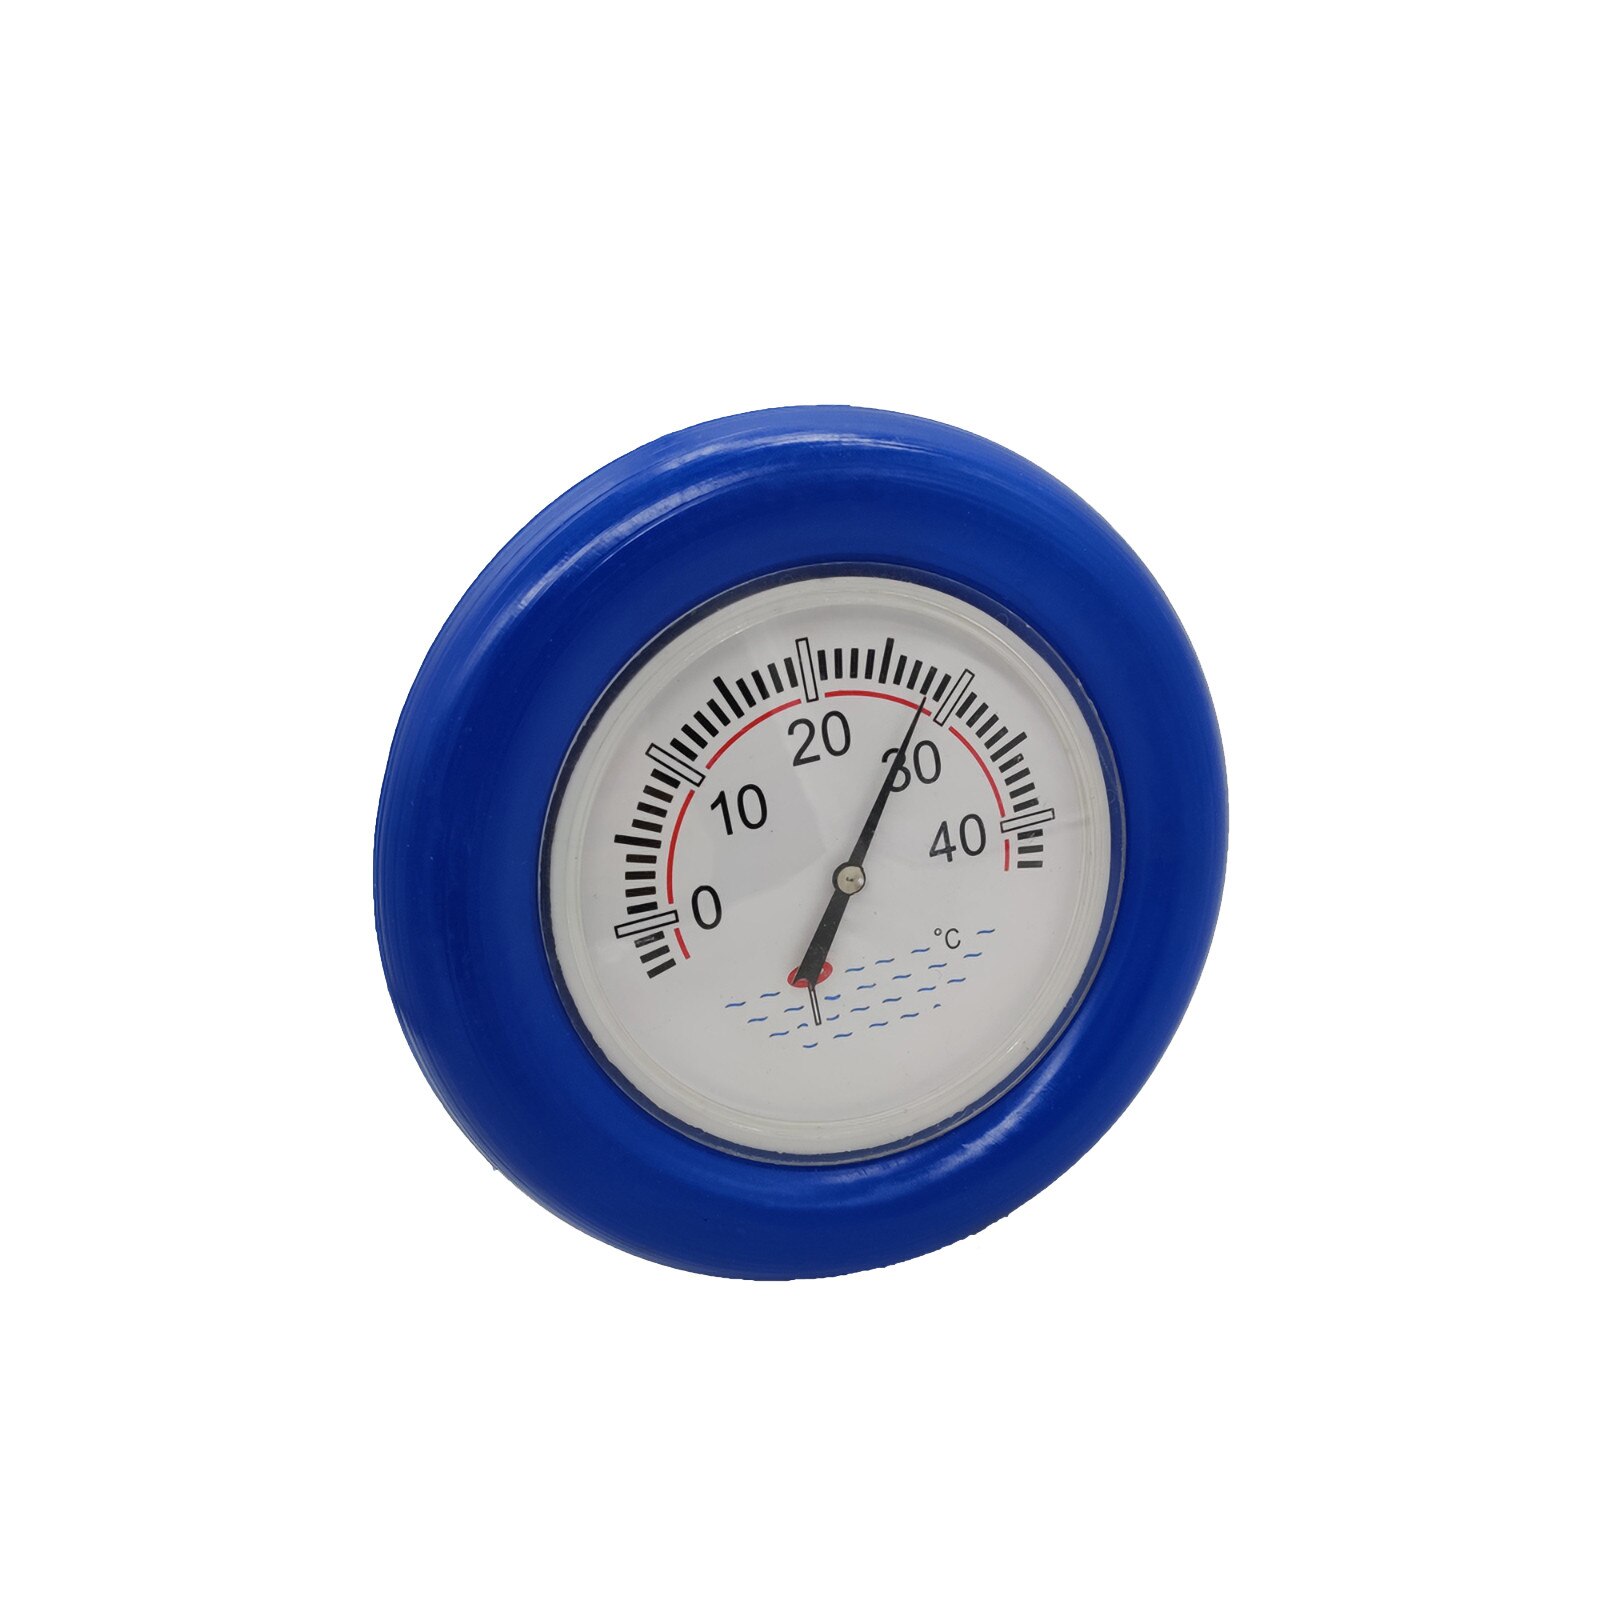 Water Thermometer Zwembad Accessoires Water Temperatuurmeter Drijvende Plaat Thermometer Zwembad Accessoires